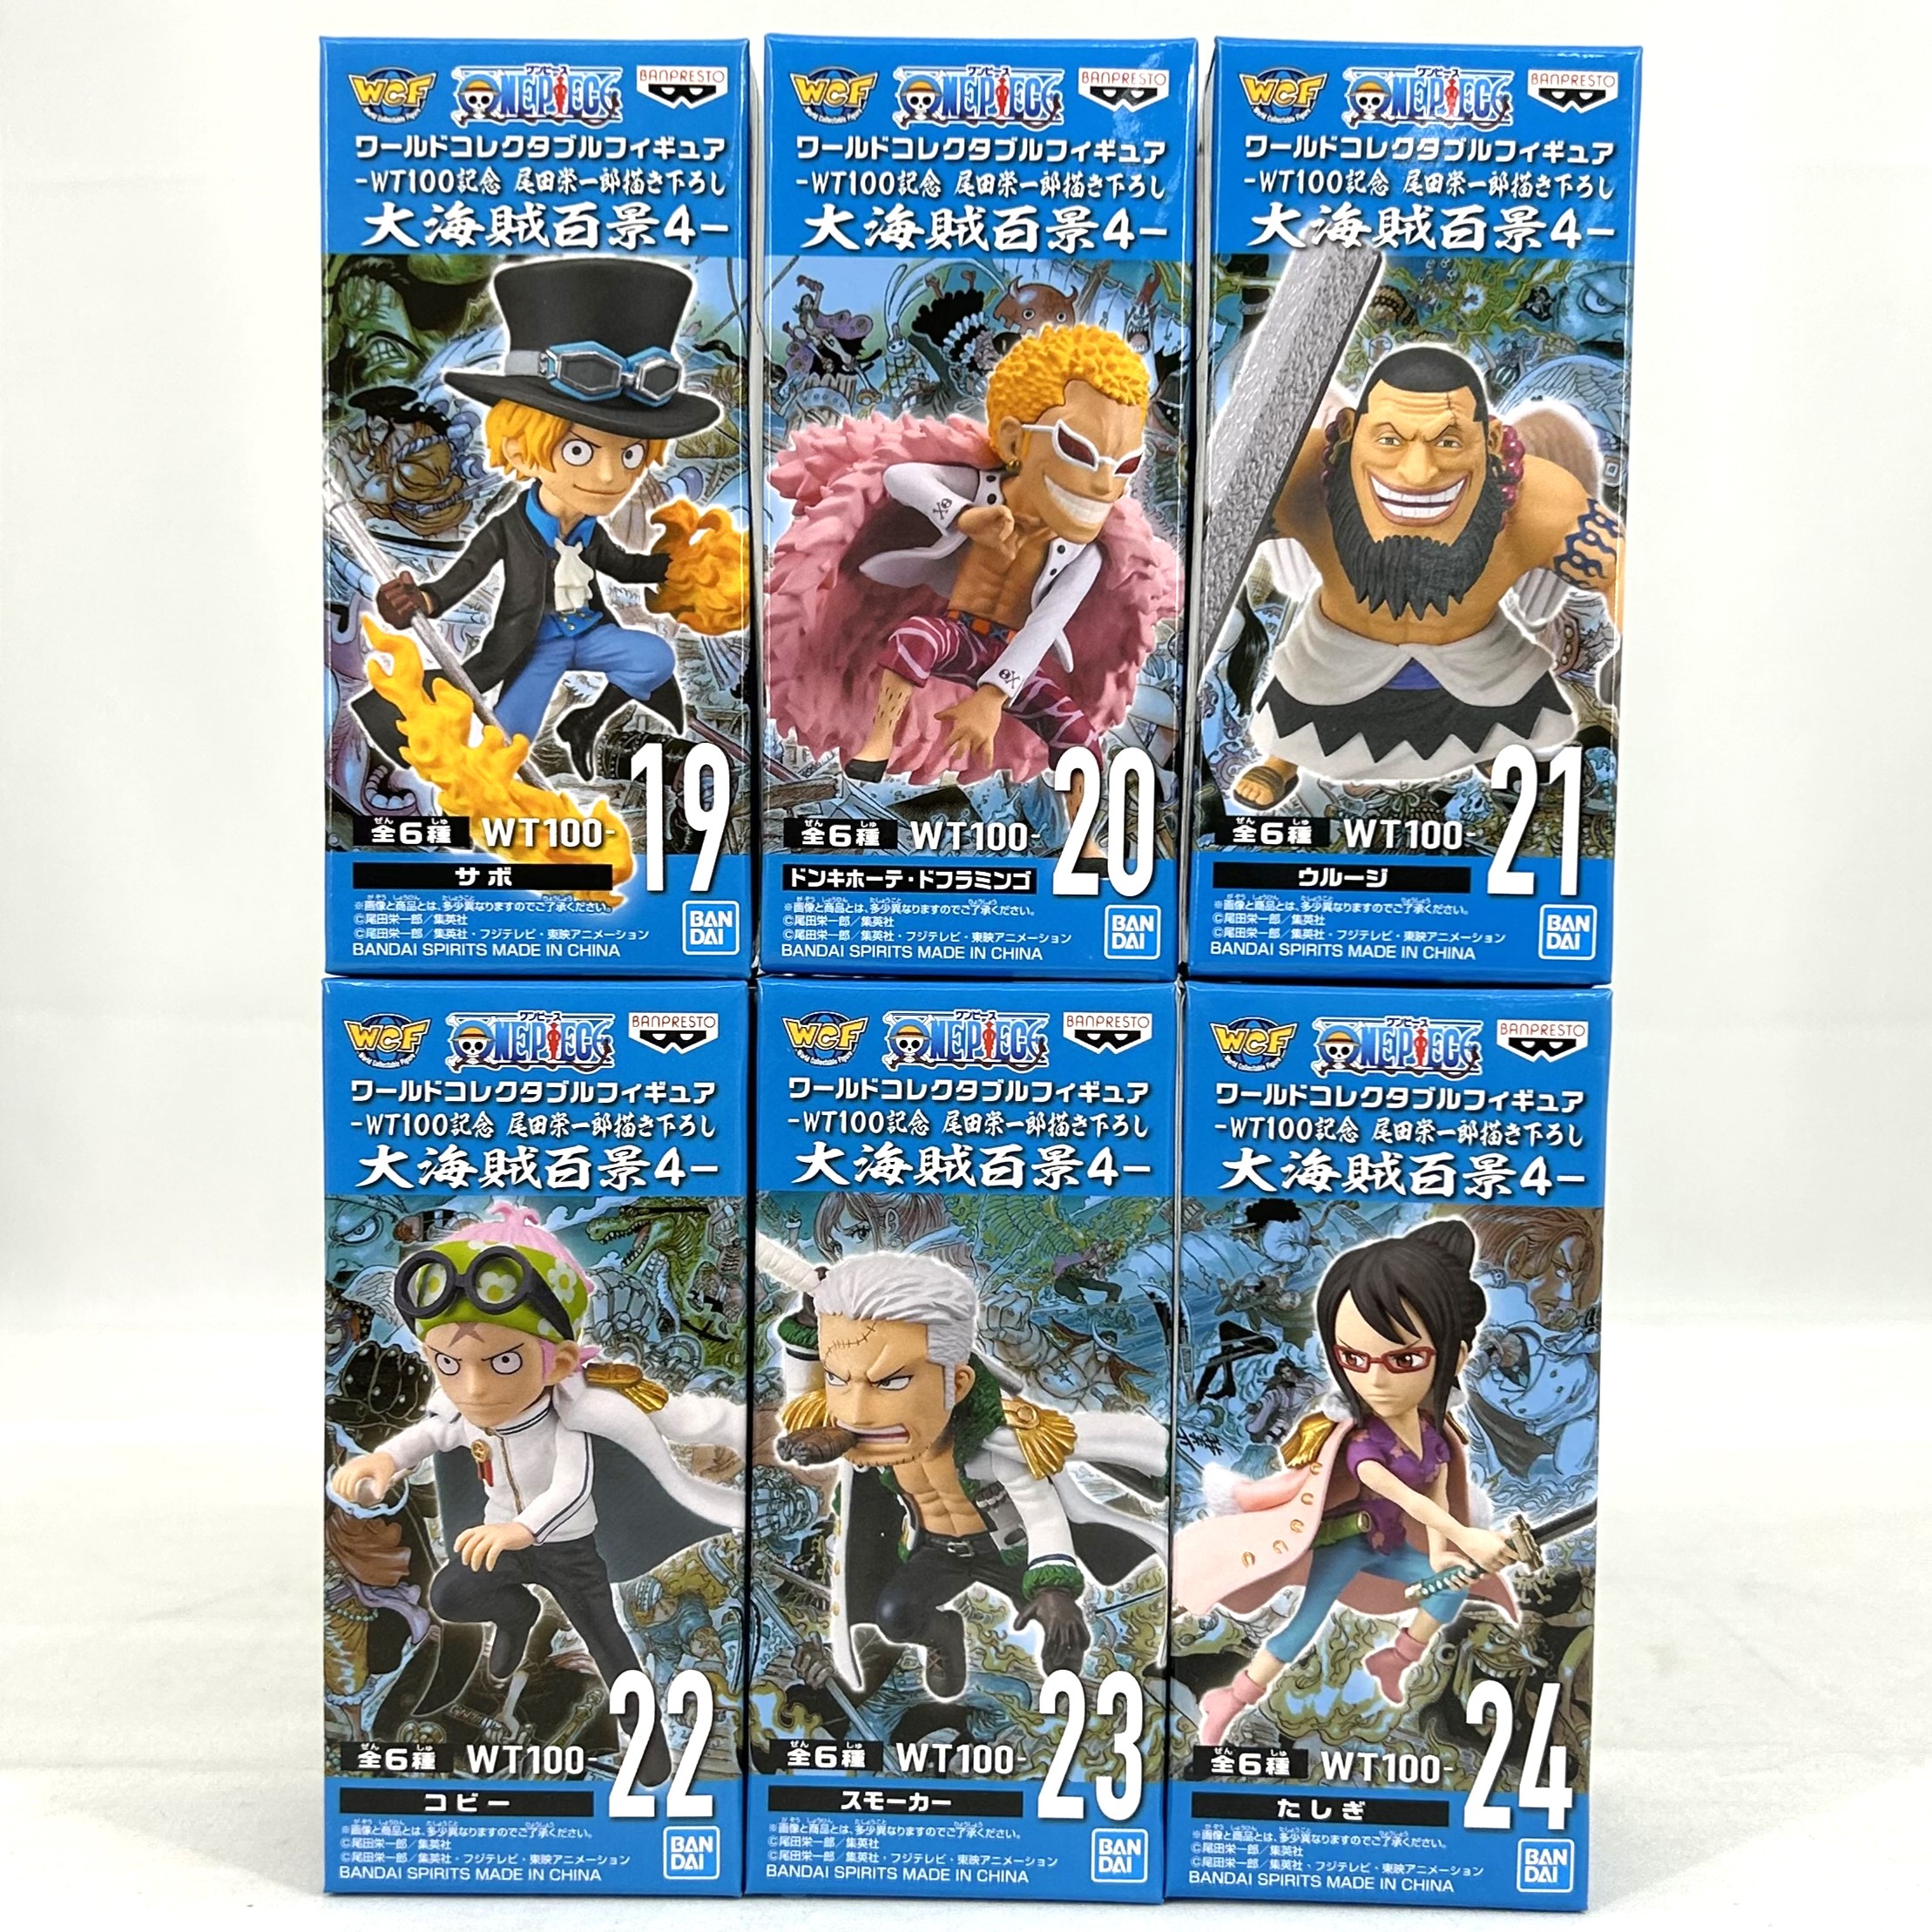 One Piece World Collectable figure WT100 WCF BANPRESTO set of 6